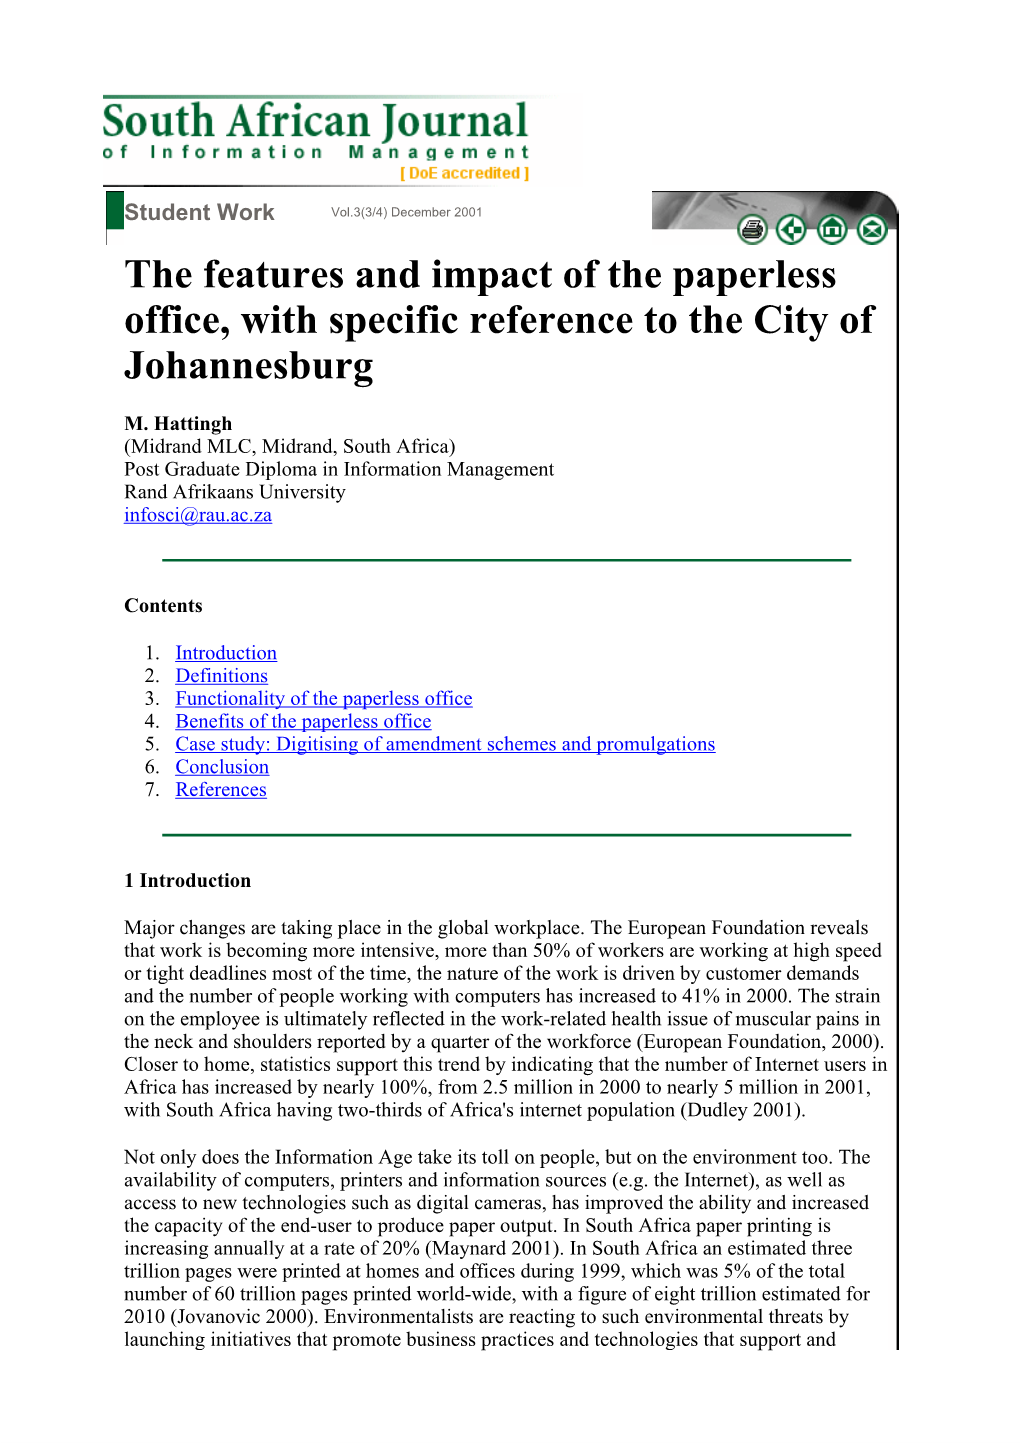 The Features and Impact of the Paperless Office, with Specific Reference to the City of Johannesburg